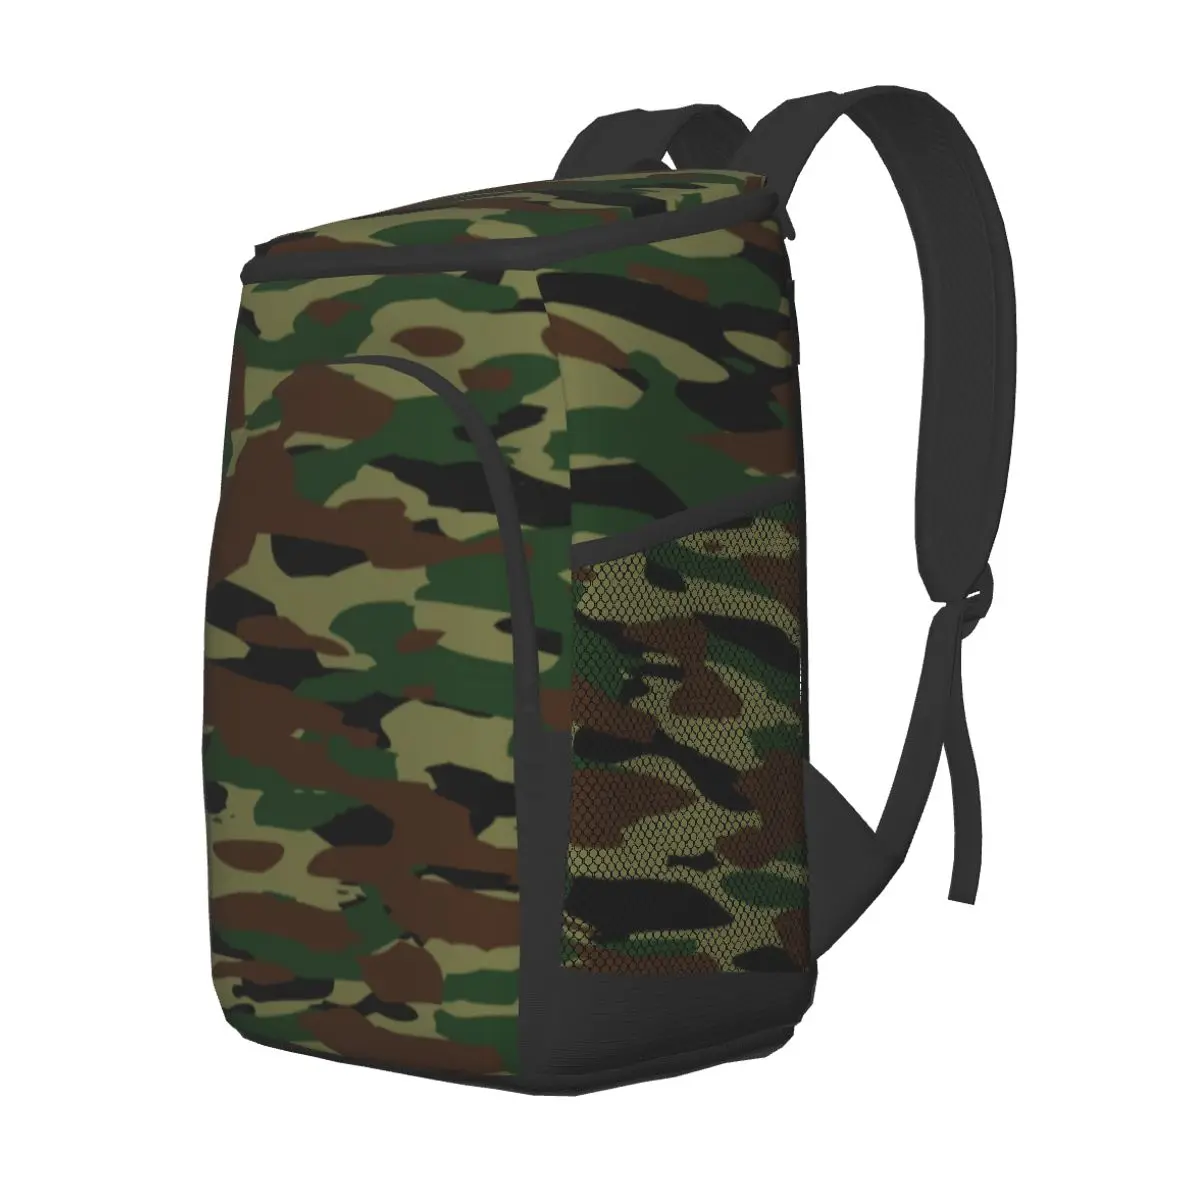 picnic cooler backpack summer camouflage pattern waterproof thermo bag refrigerator fresh keeping thermal insulated bag free global shipping